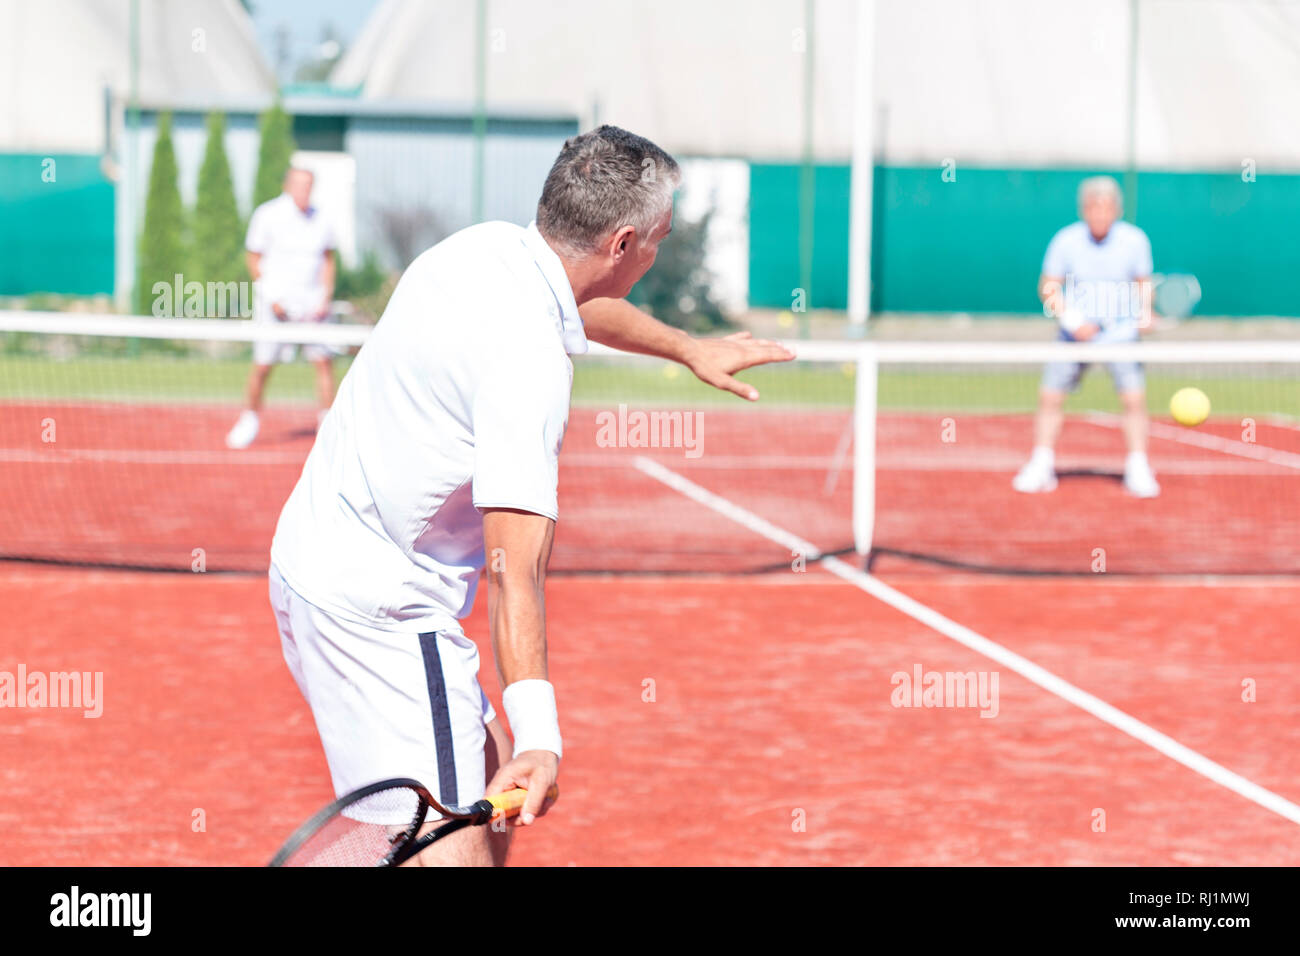 Man swinging racket while playing tennis doubles on red court during summer weekend Stock Photo